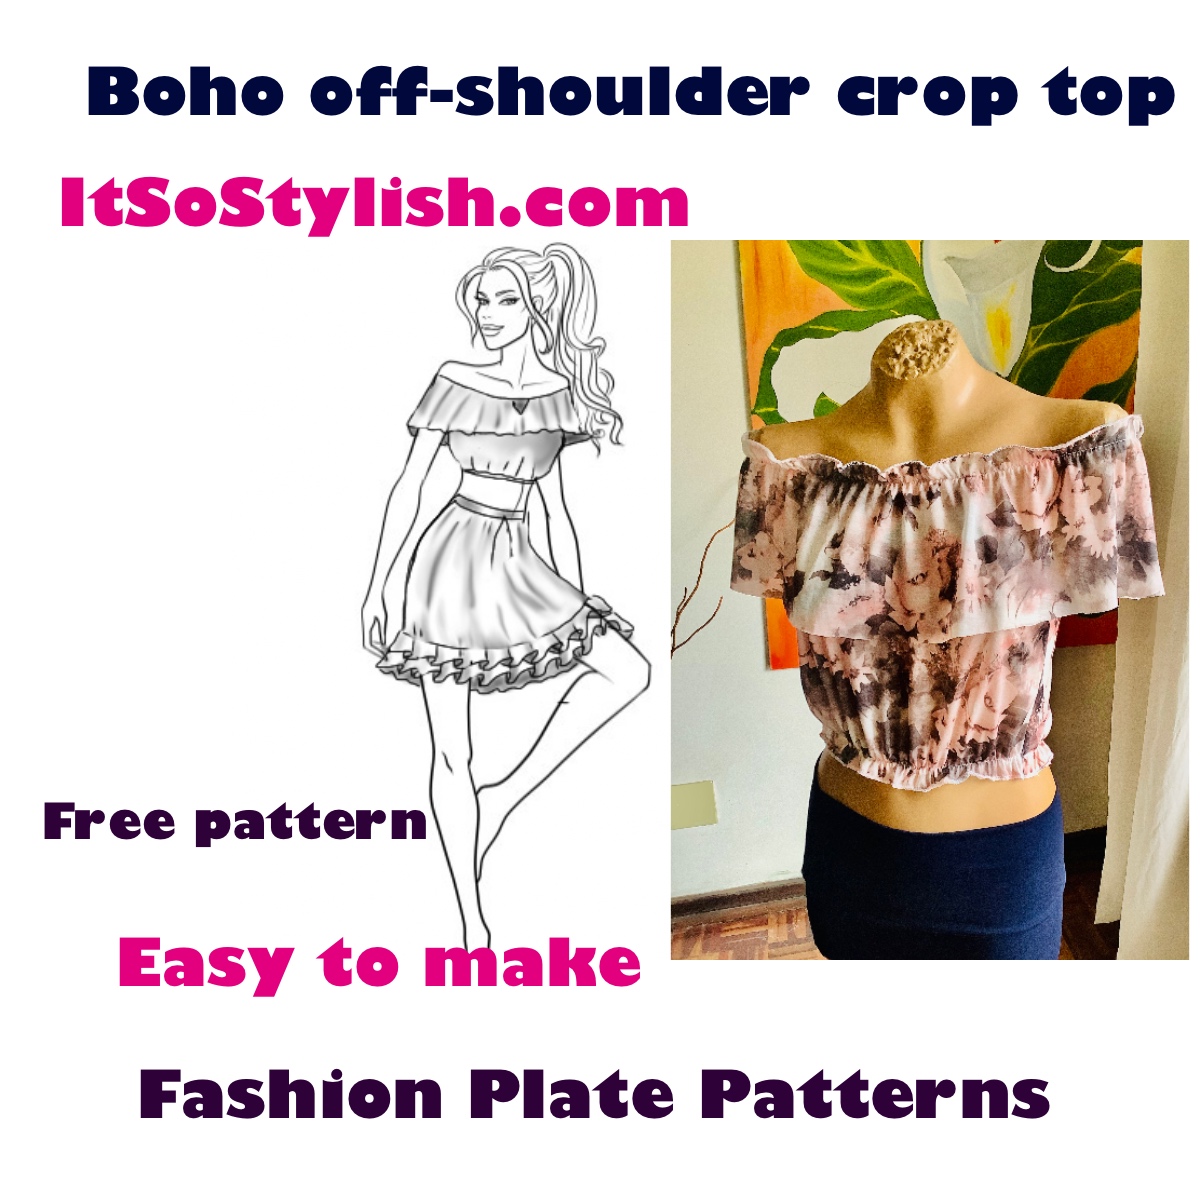 How to sew an easy Boho cropped top